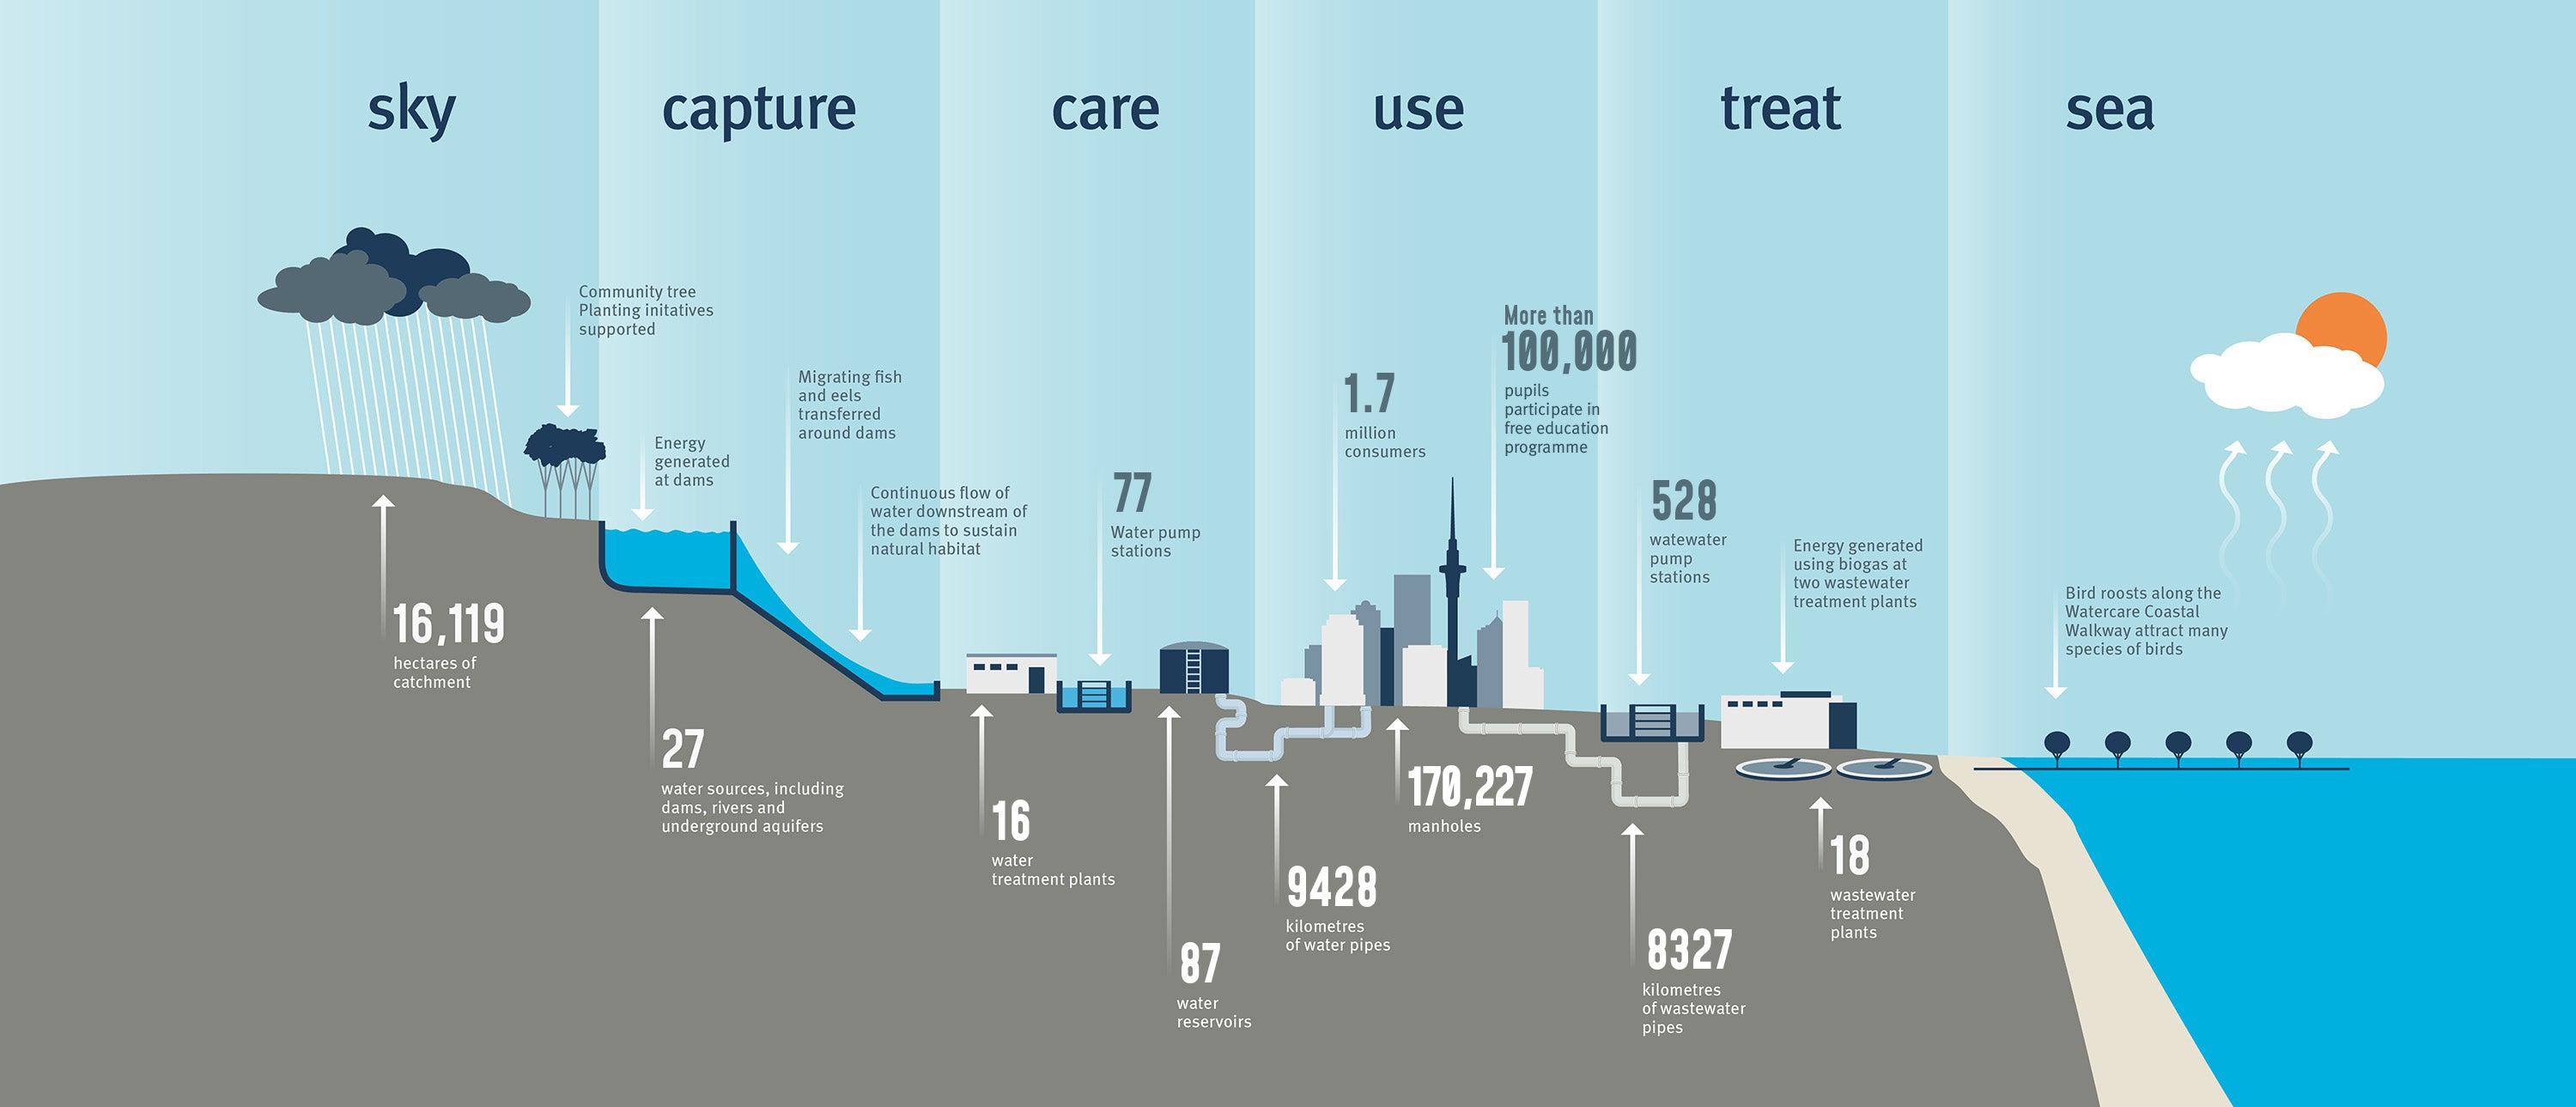 Infographic of where our water comes, the work we do on the ground, and where our water and wastewater ends up